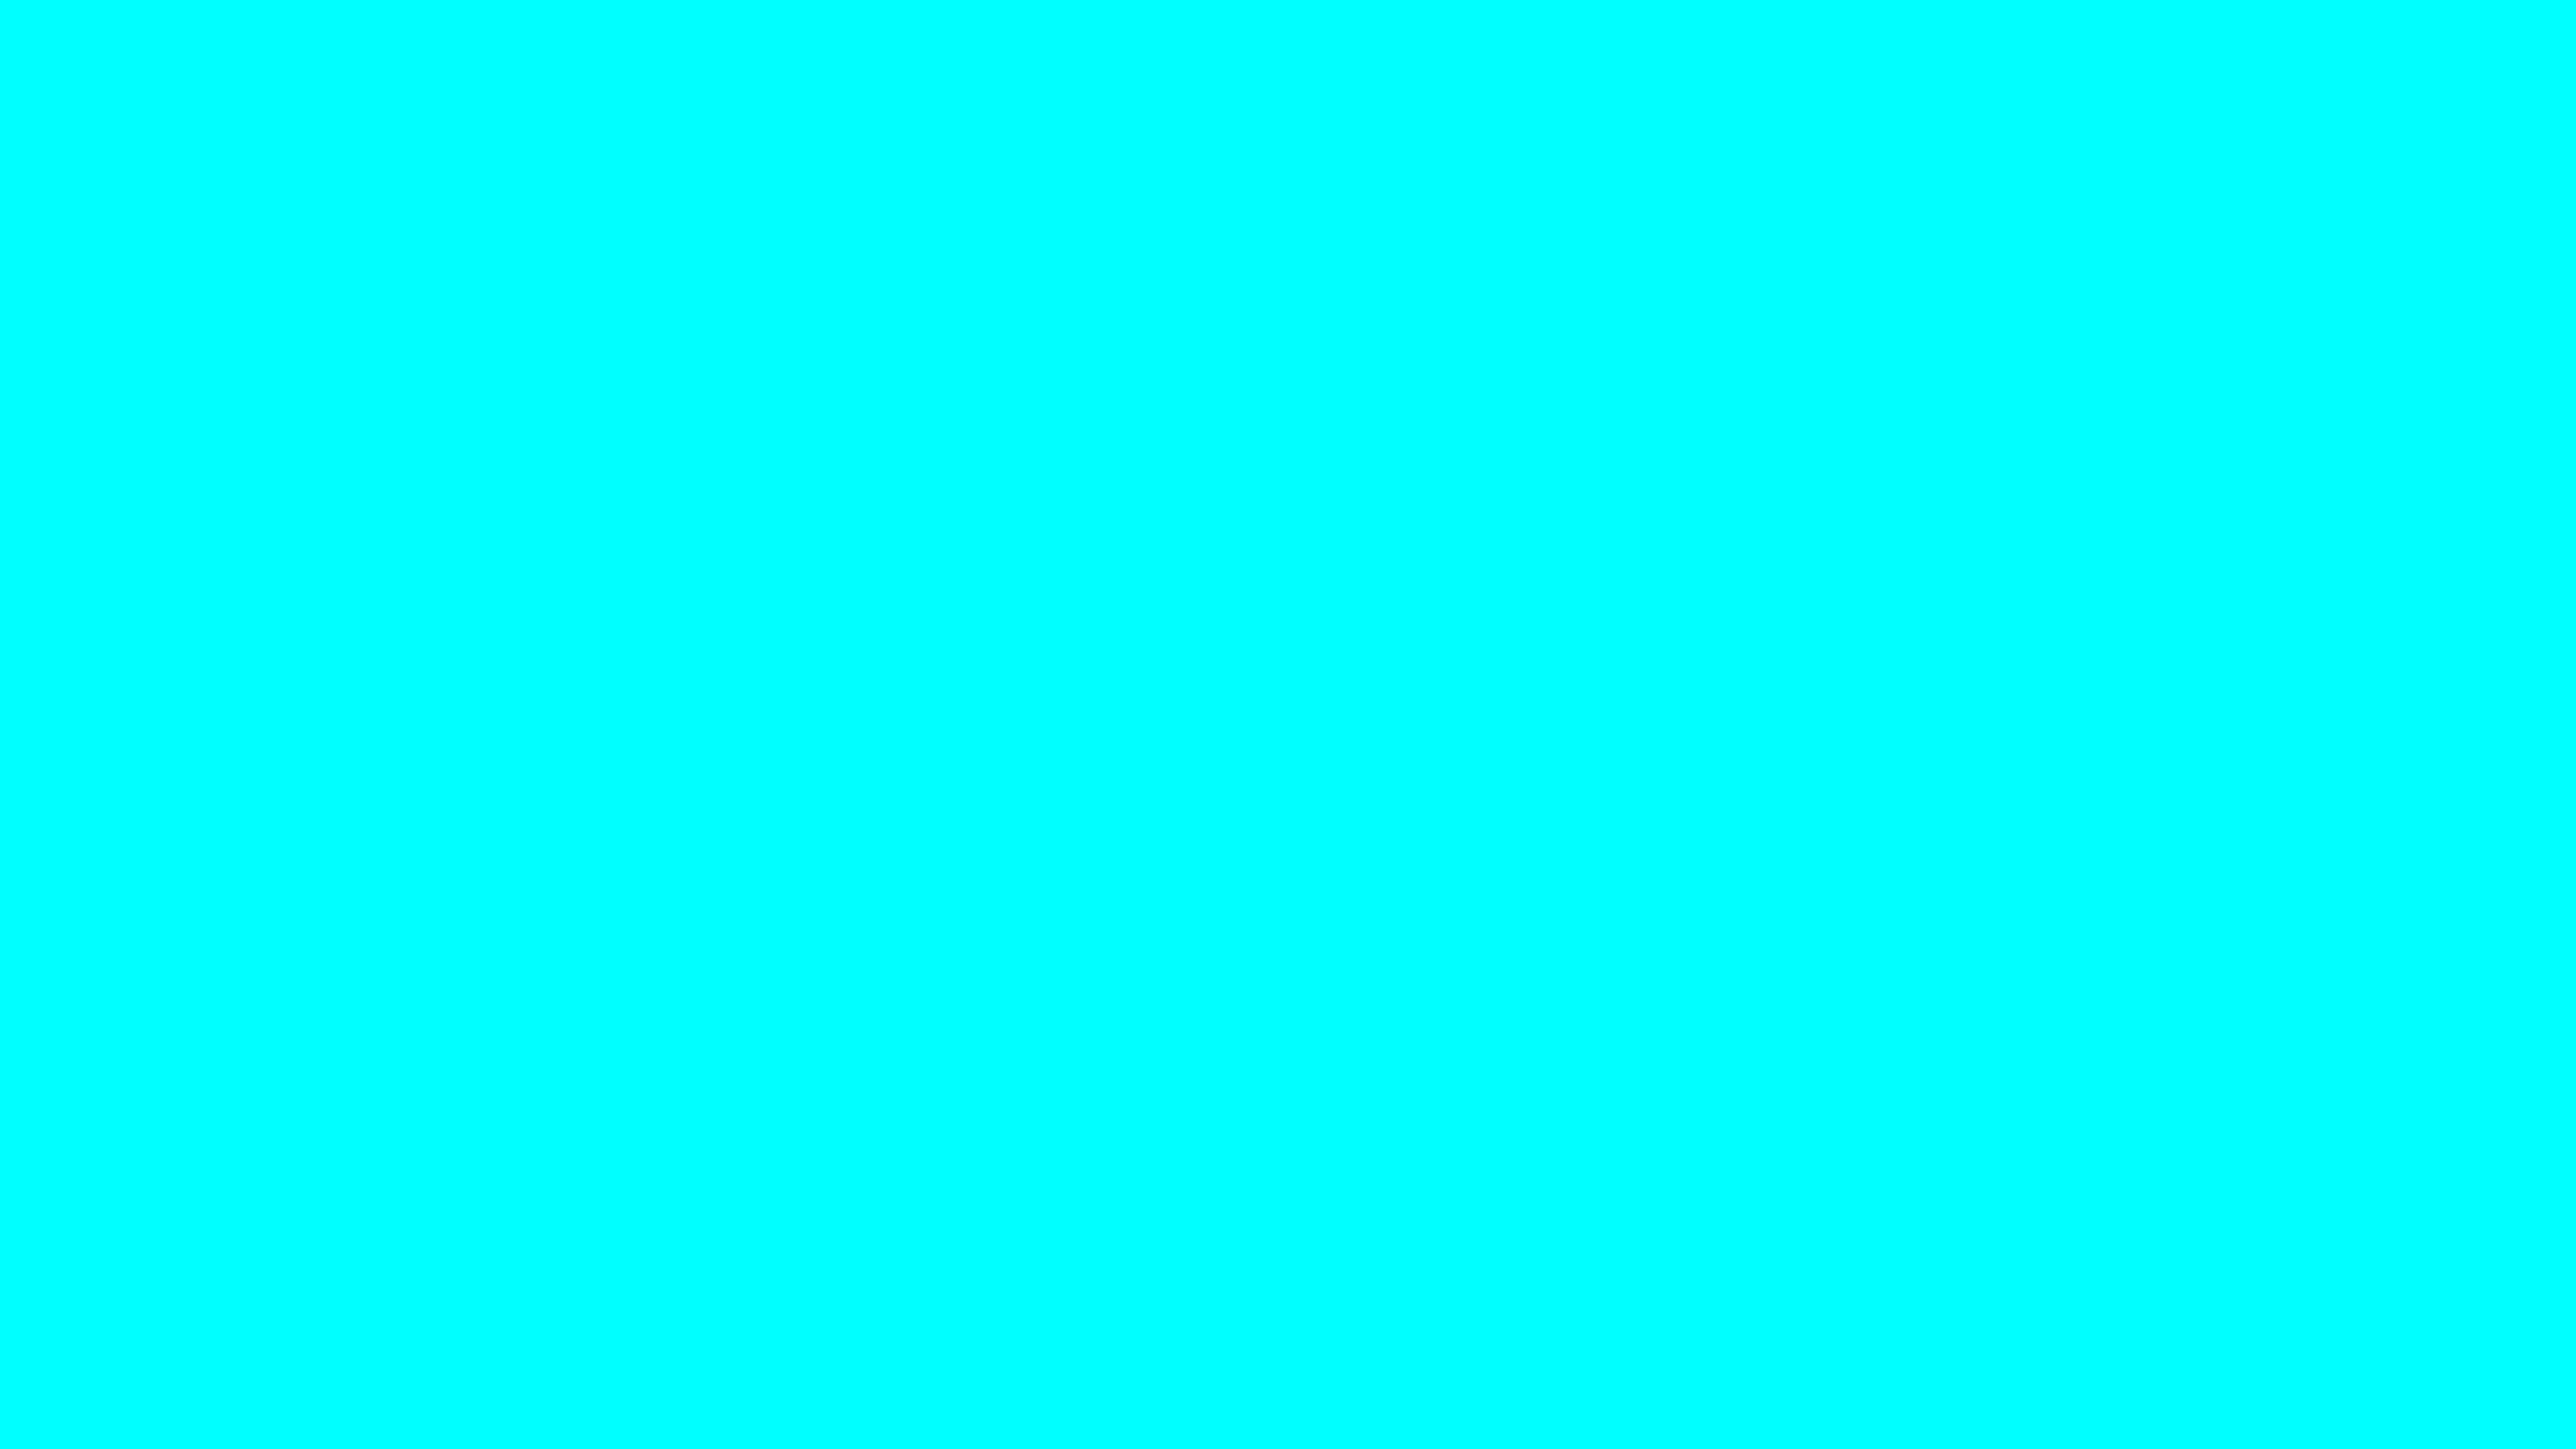 7680x4320 Electric Cyan Solid Color Background